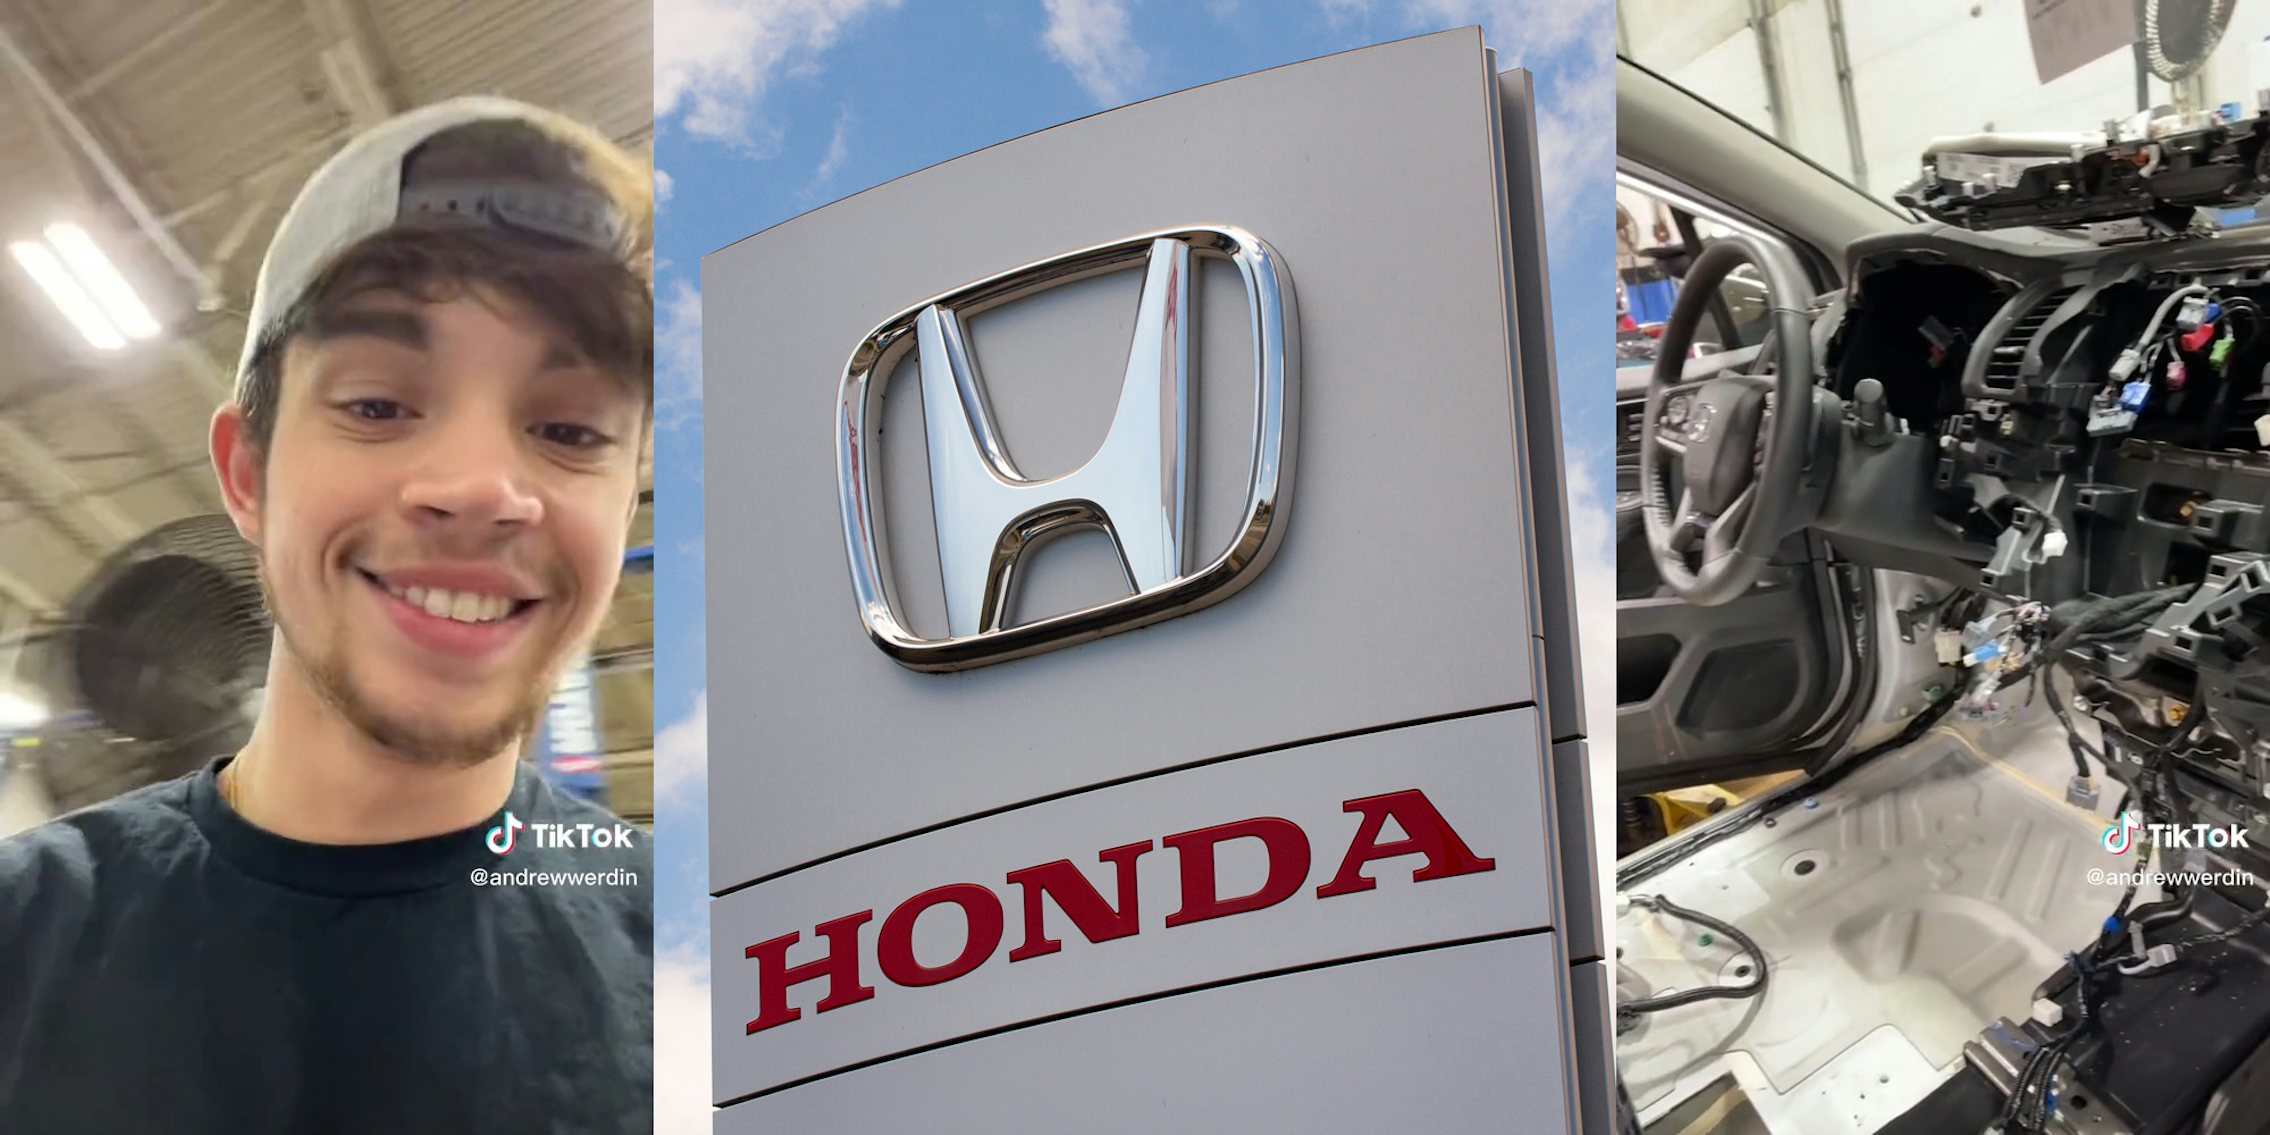 service technician (l) honda logo on sign (c) van with dashboard removed (r)